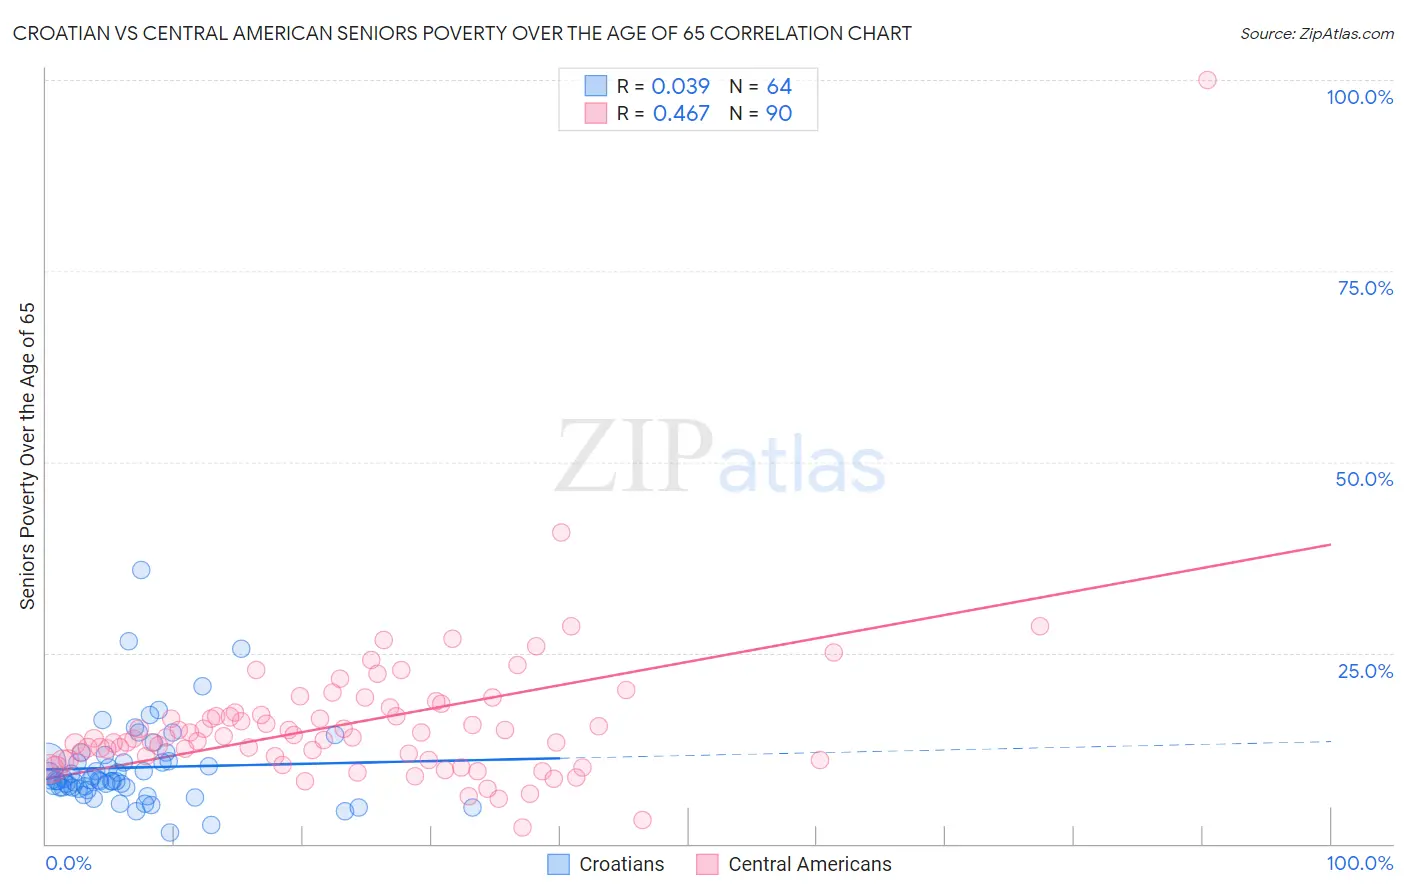 Croatian vs Central American Seniors Poverty Over the Age of 65